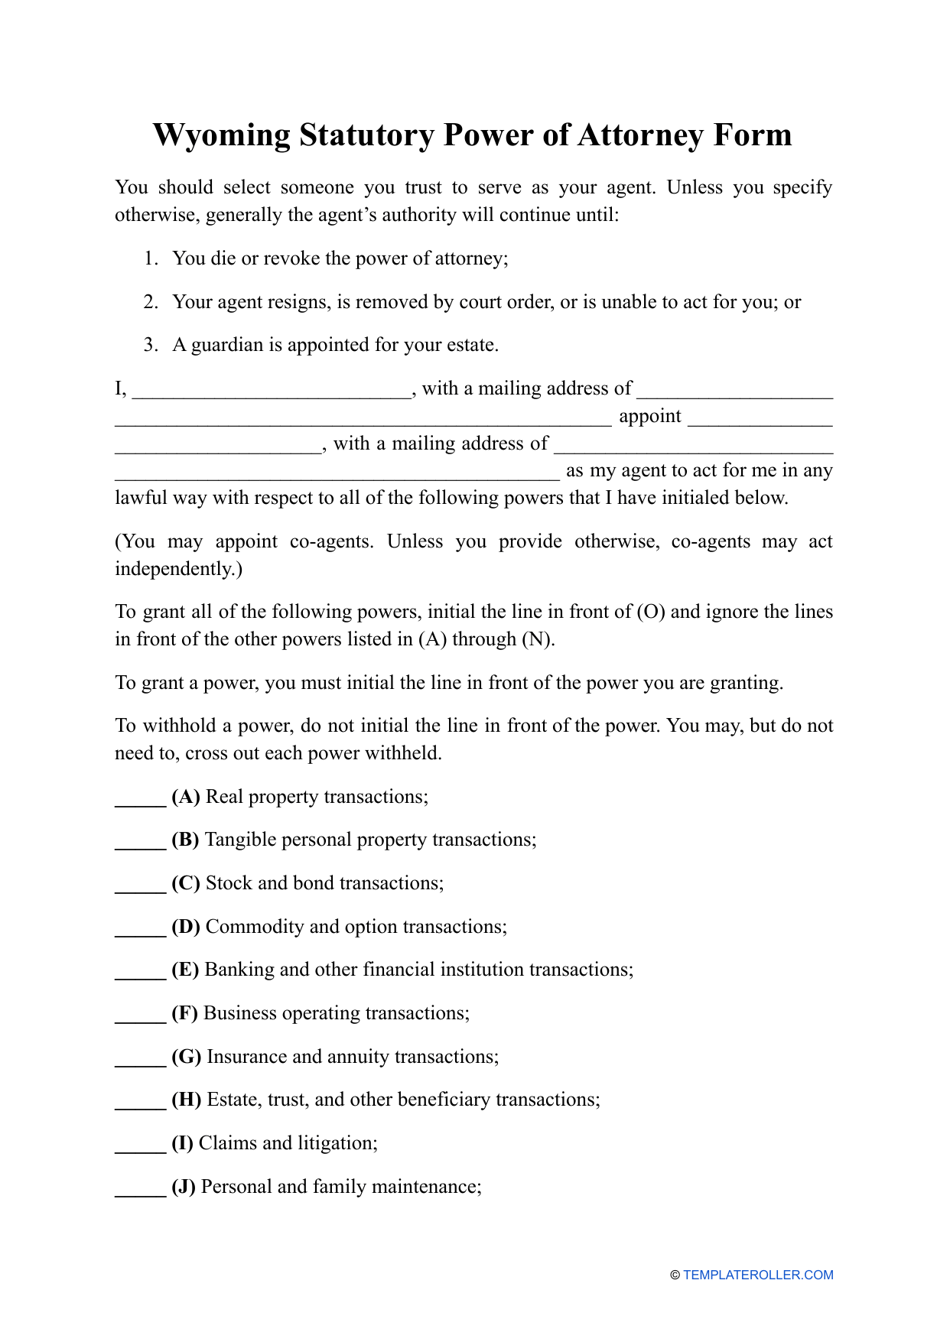 Statutory Power of Attorney Form - Wyoming, Page 1